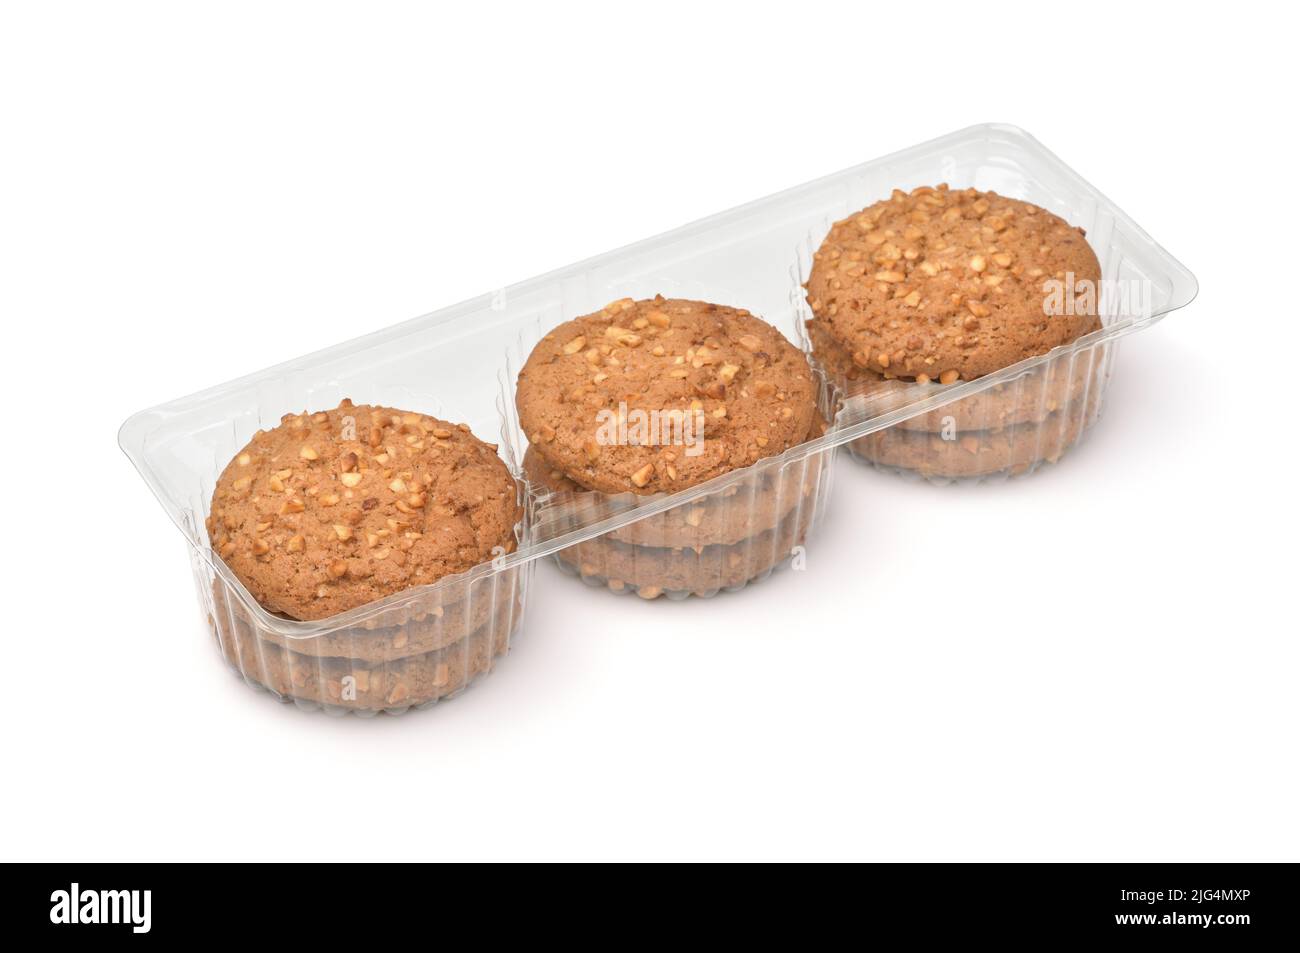 Oatmeal cookies with nut crumbs in transparent retail plastic tray isolated on white Stock Photo